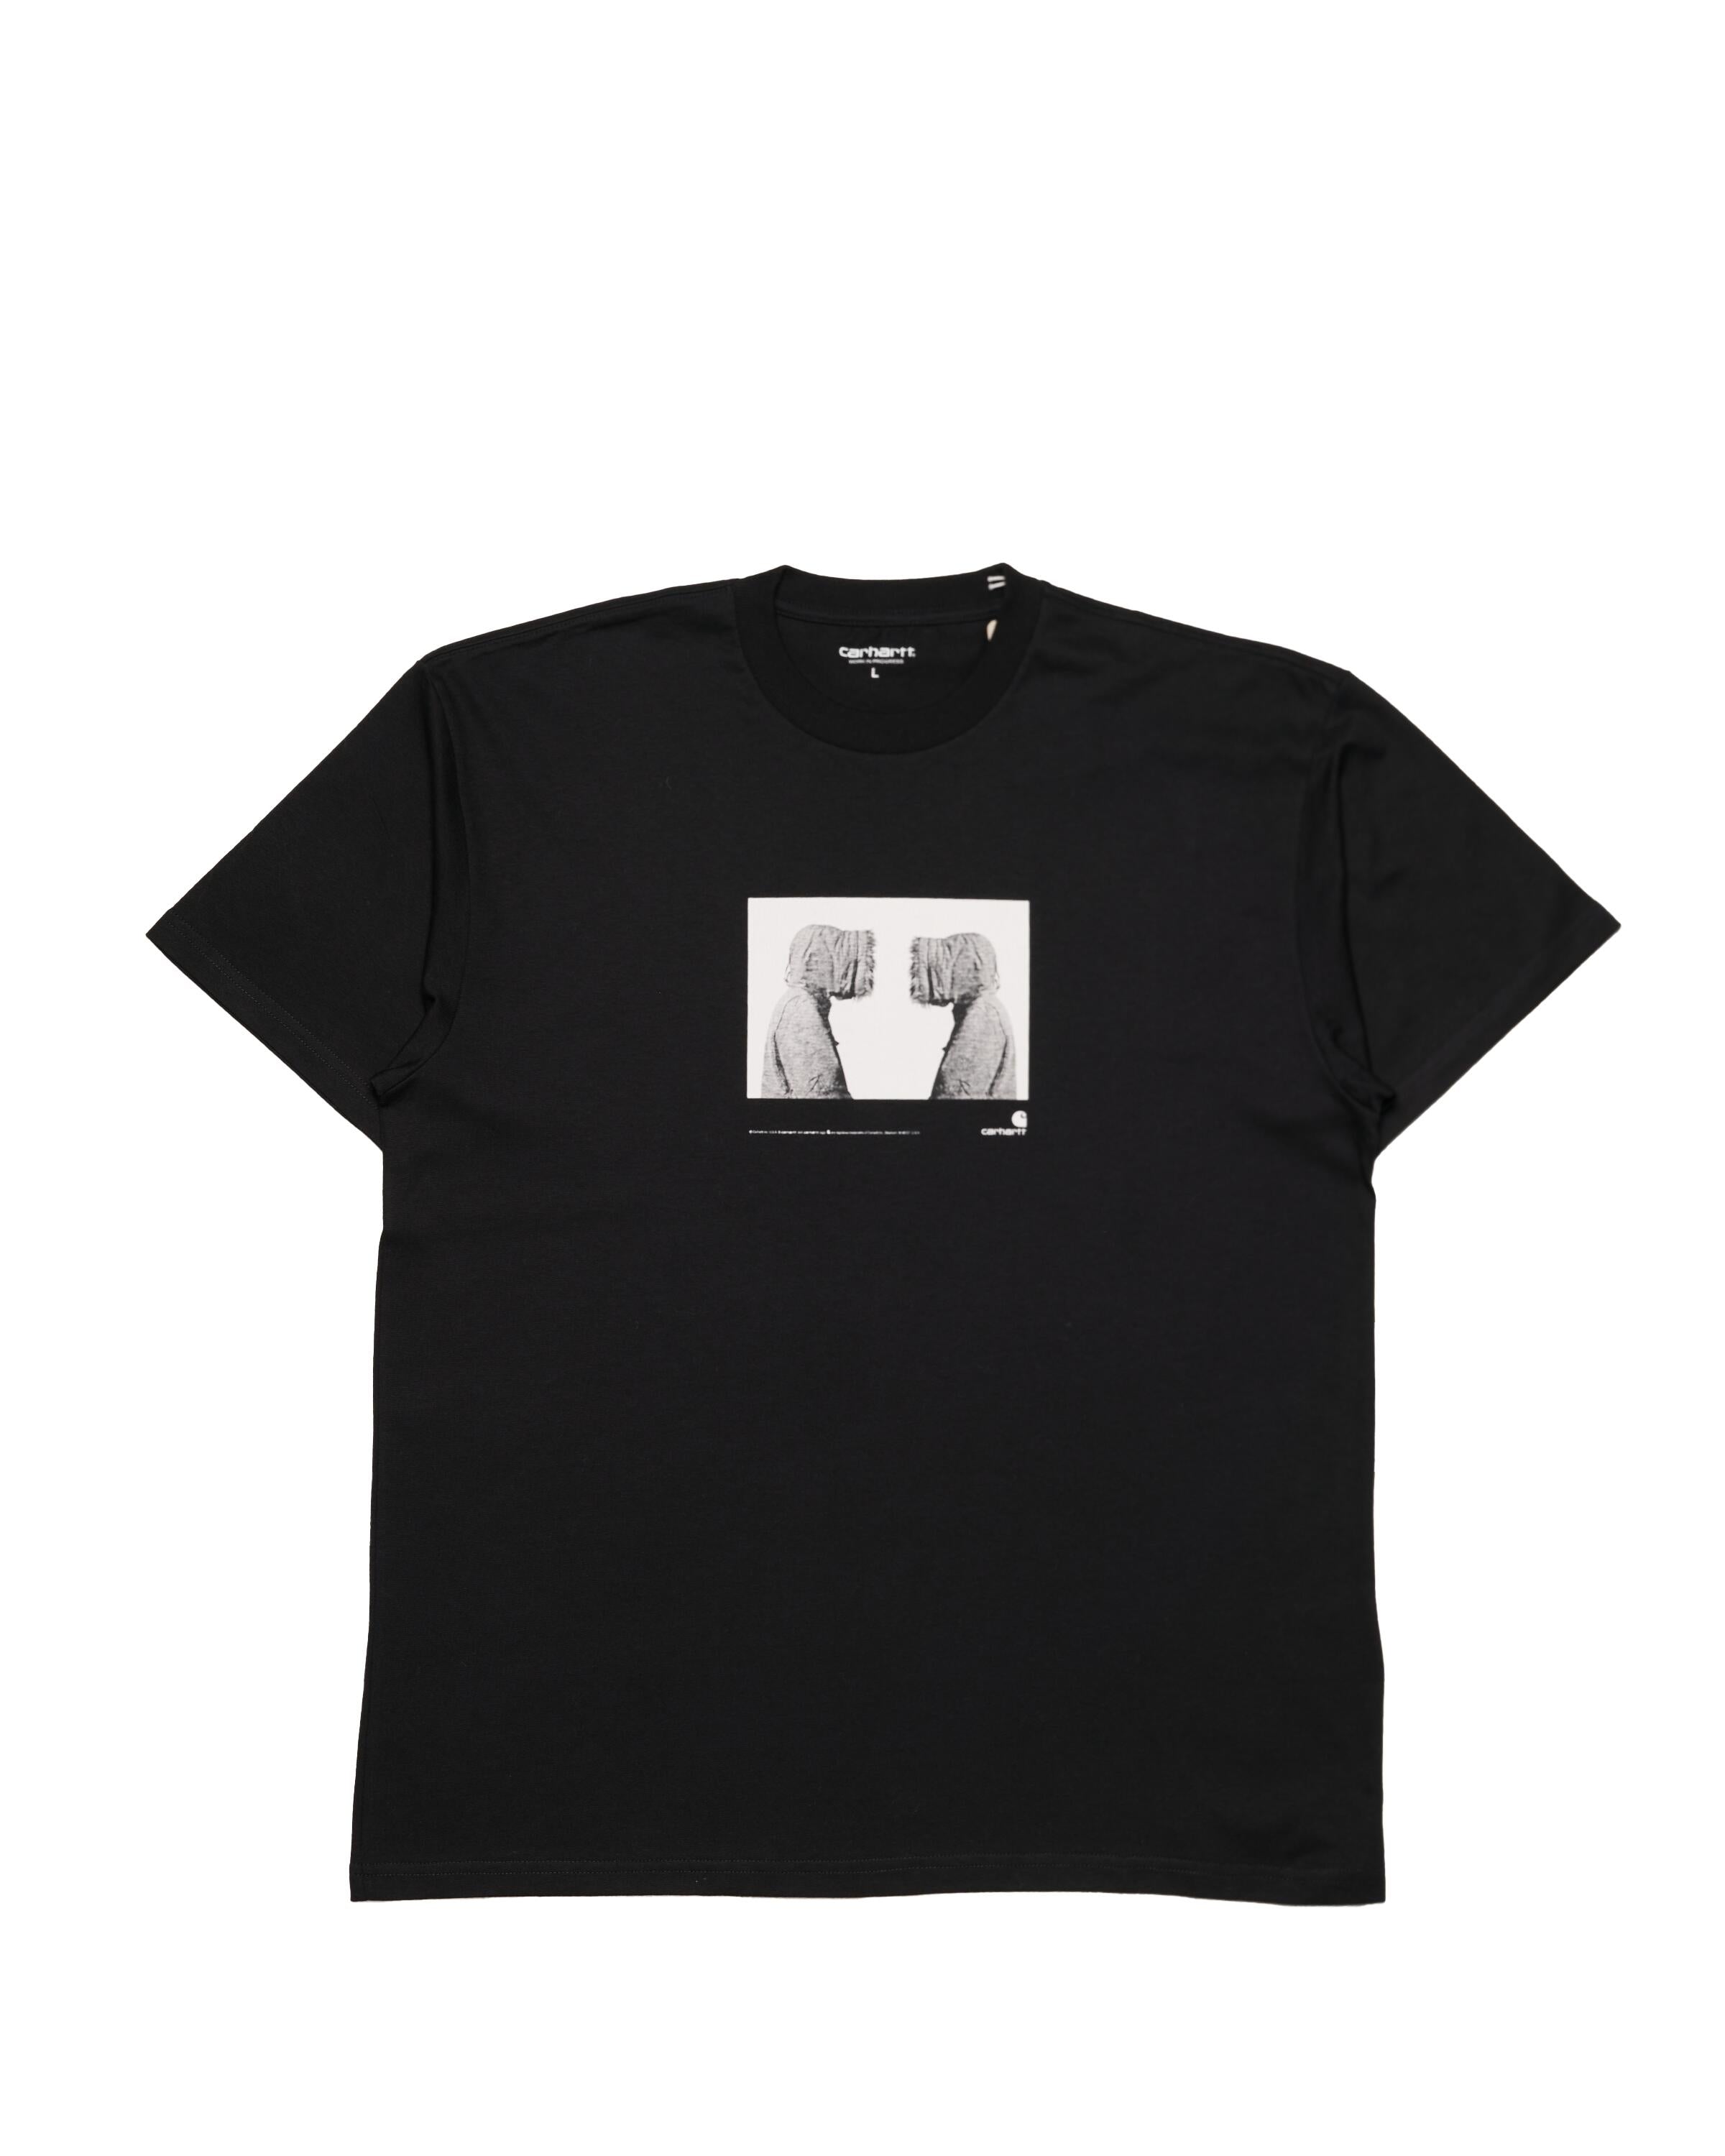 Carhartt WIP S/S Cold T-Shirt